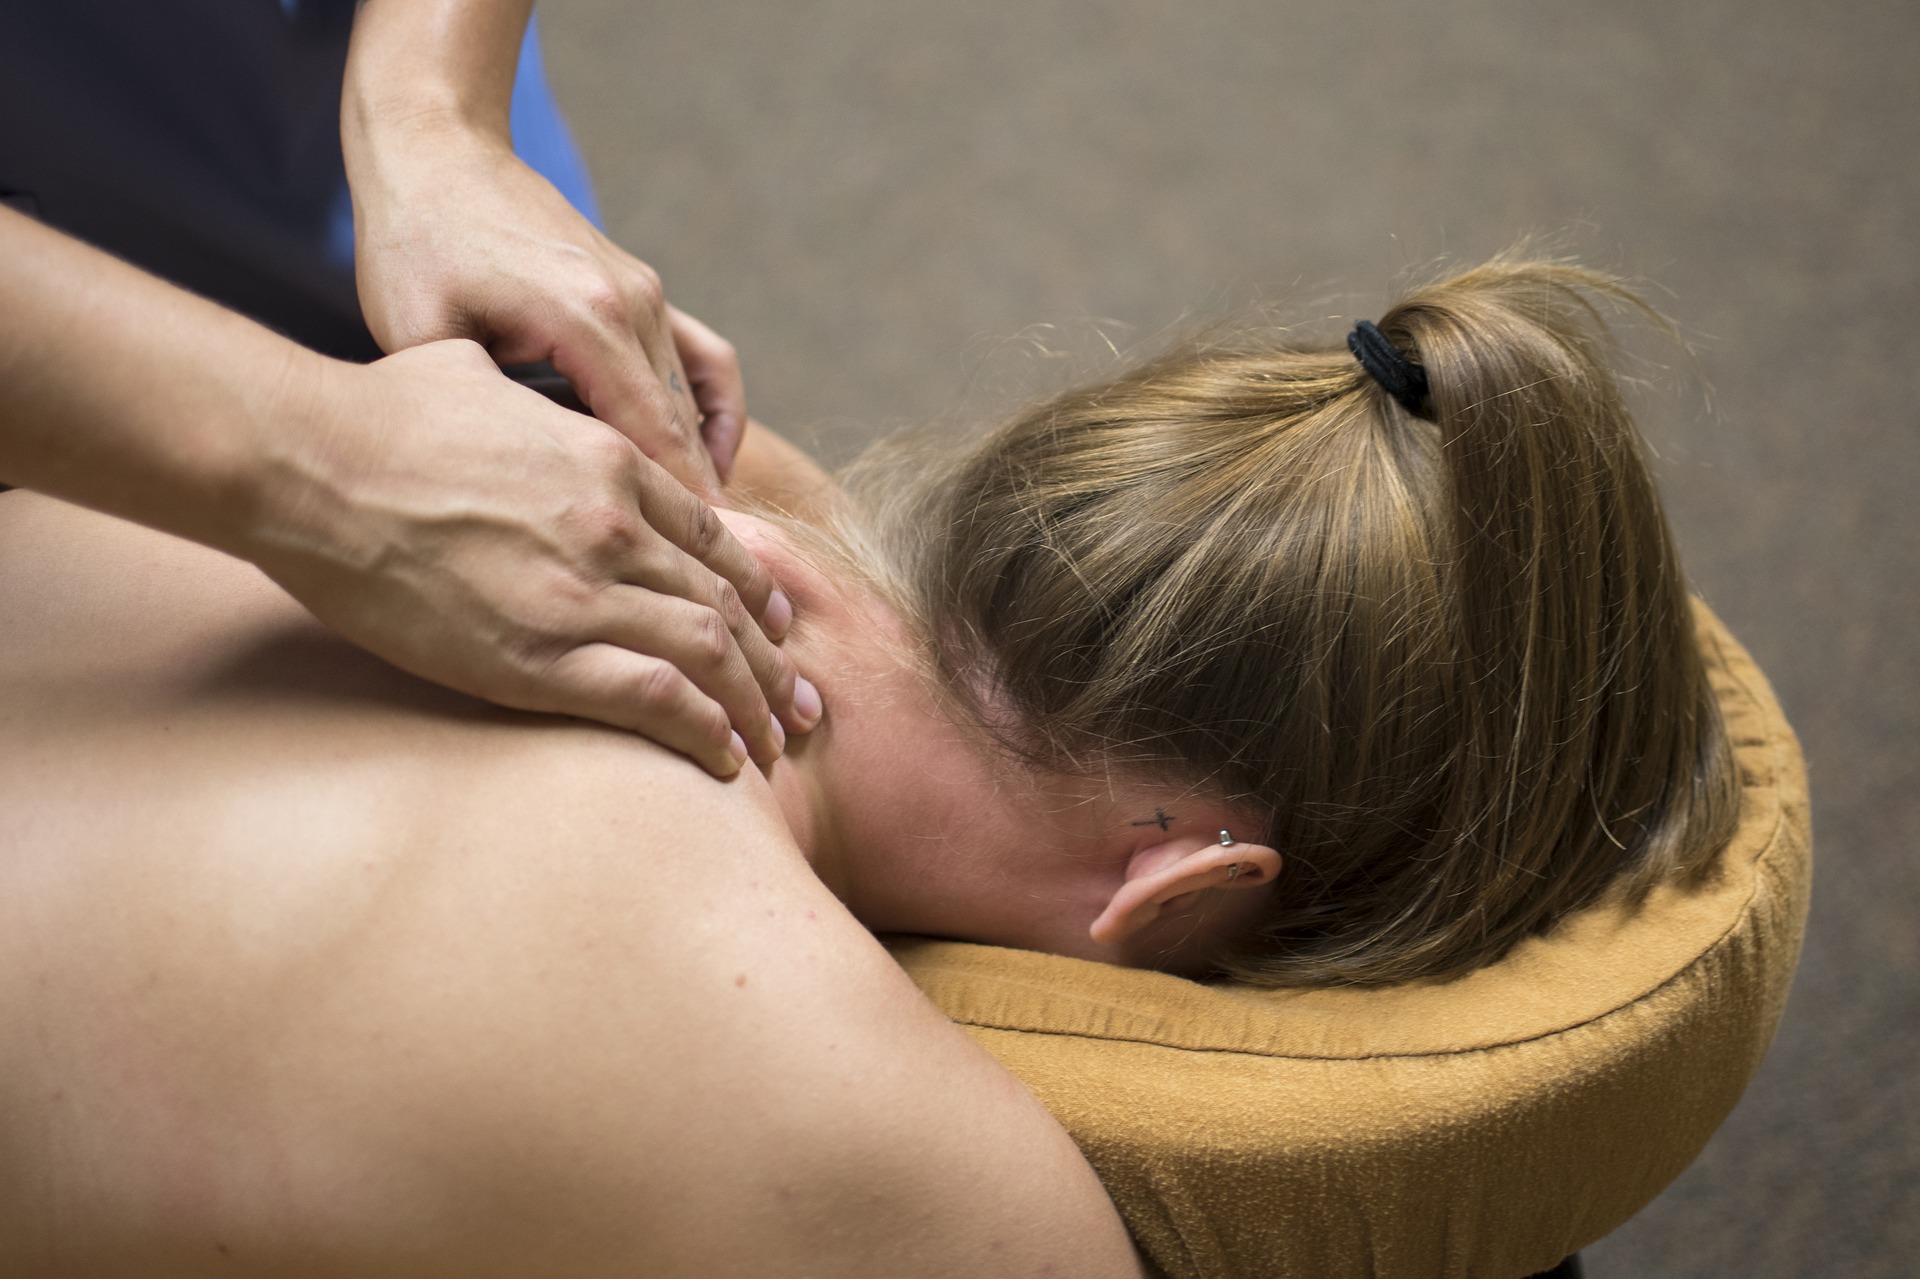 head and shoulder shot of a woman lying face down on a massage couch her head in a cradle and she is getting a neck massage